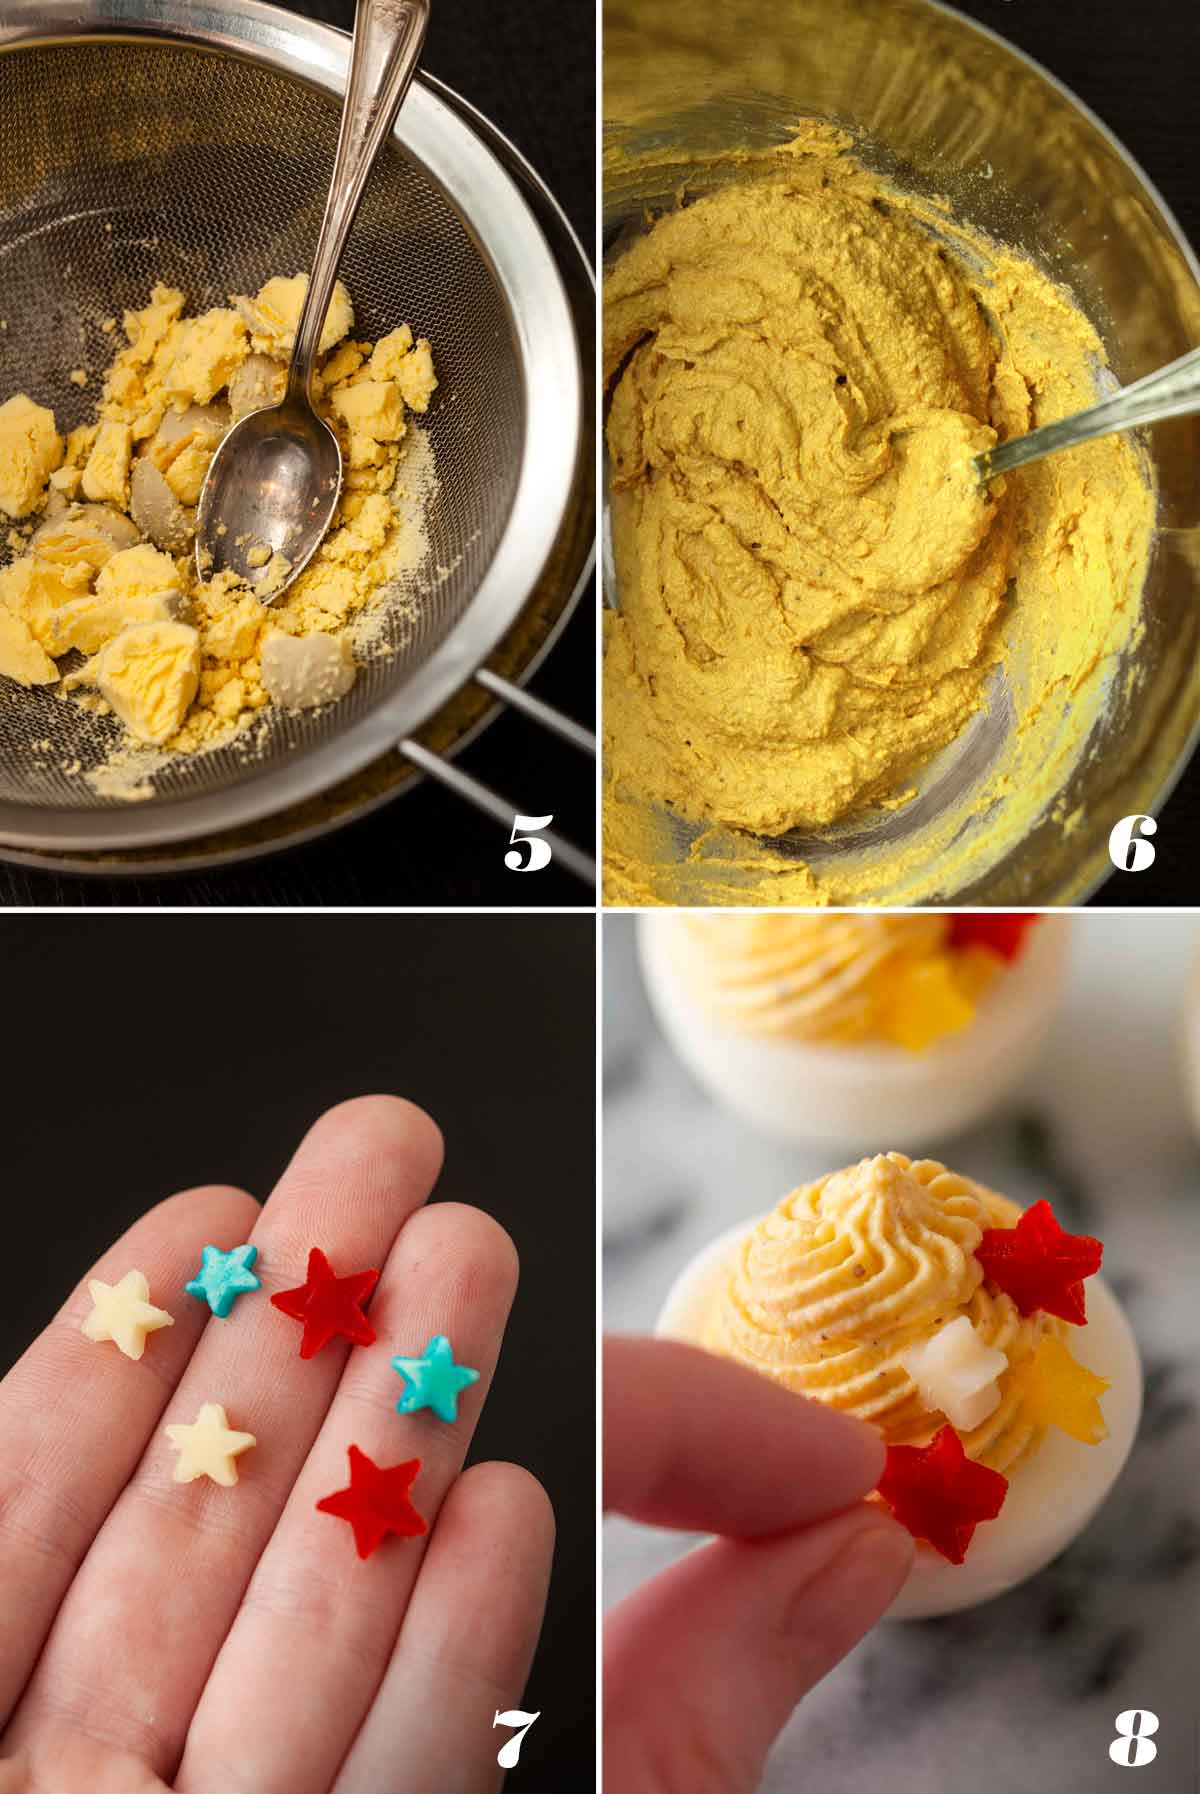 A collage of 4 numbered images showing how to make deviled egg filling and star garnishes.